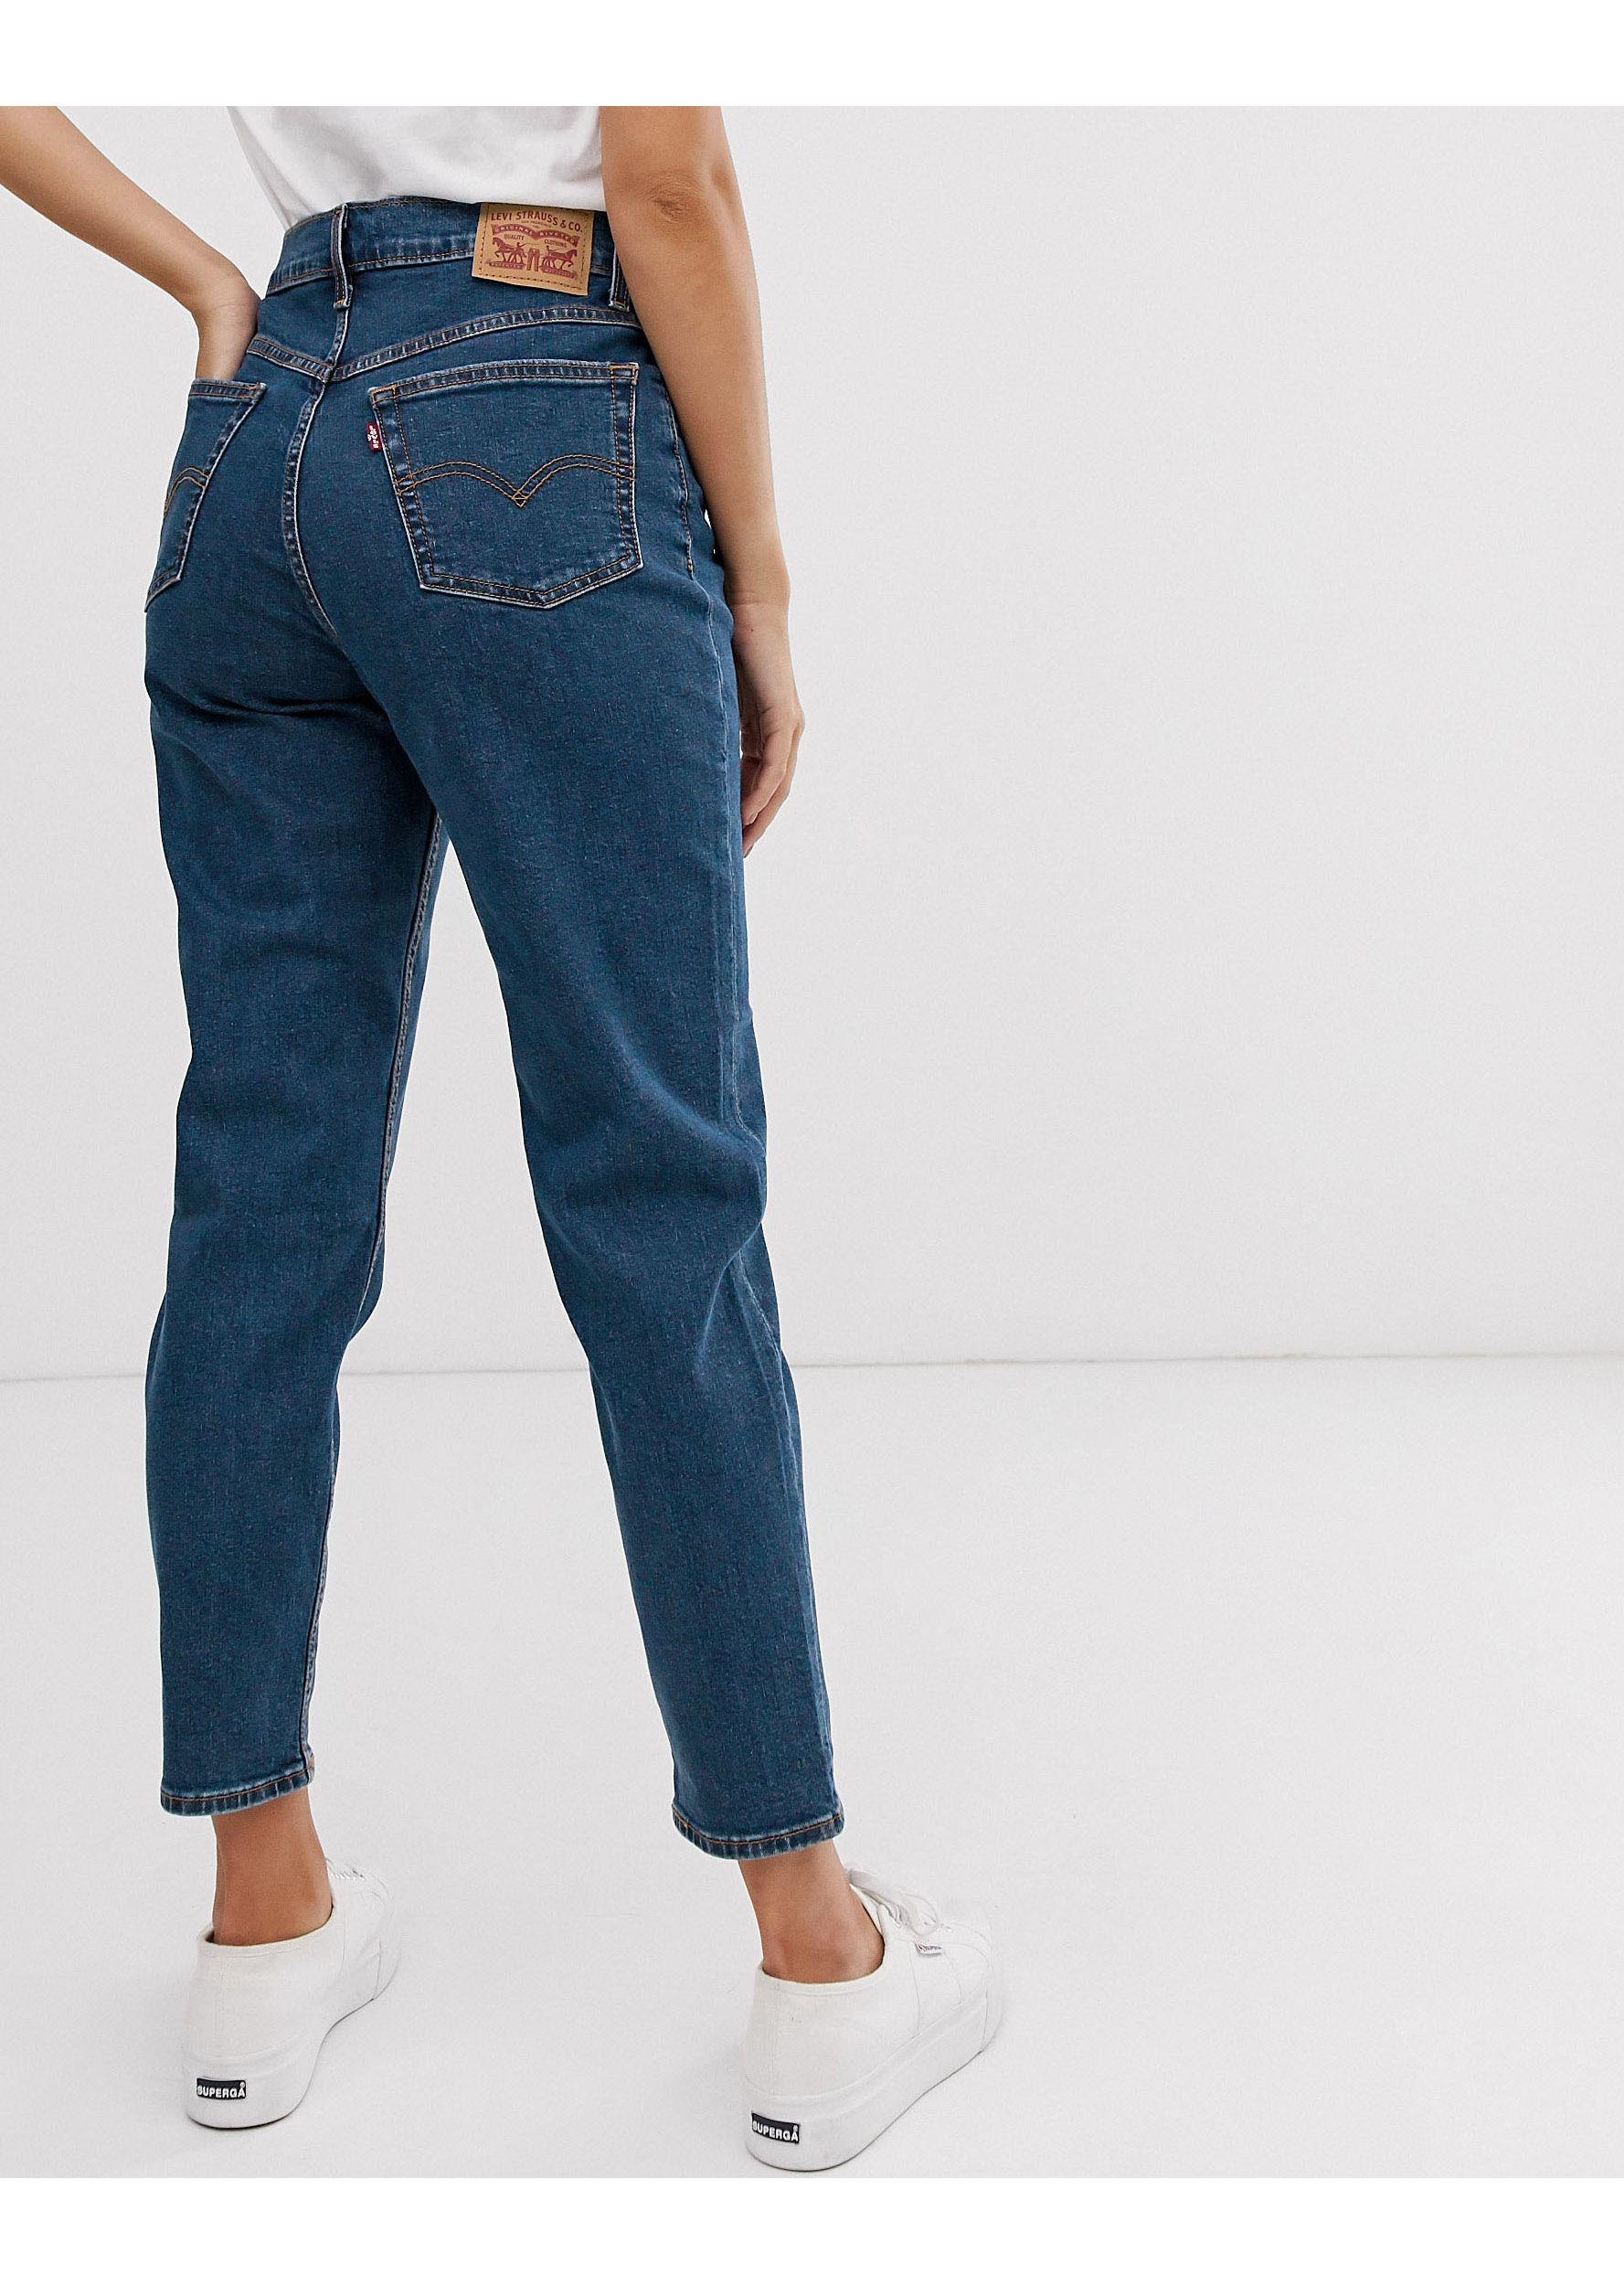 Levi's Exposed Button Mom Jean in Blue